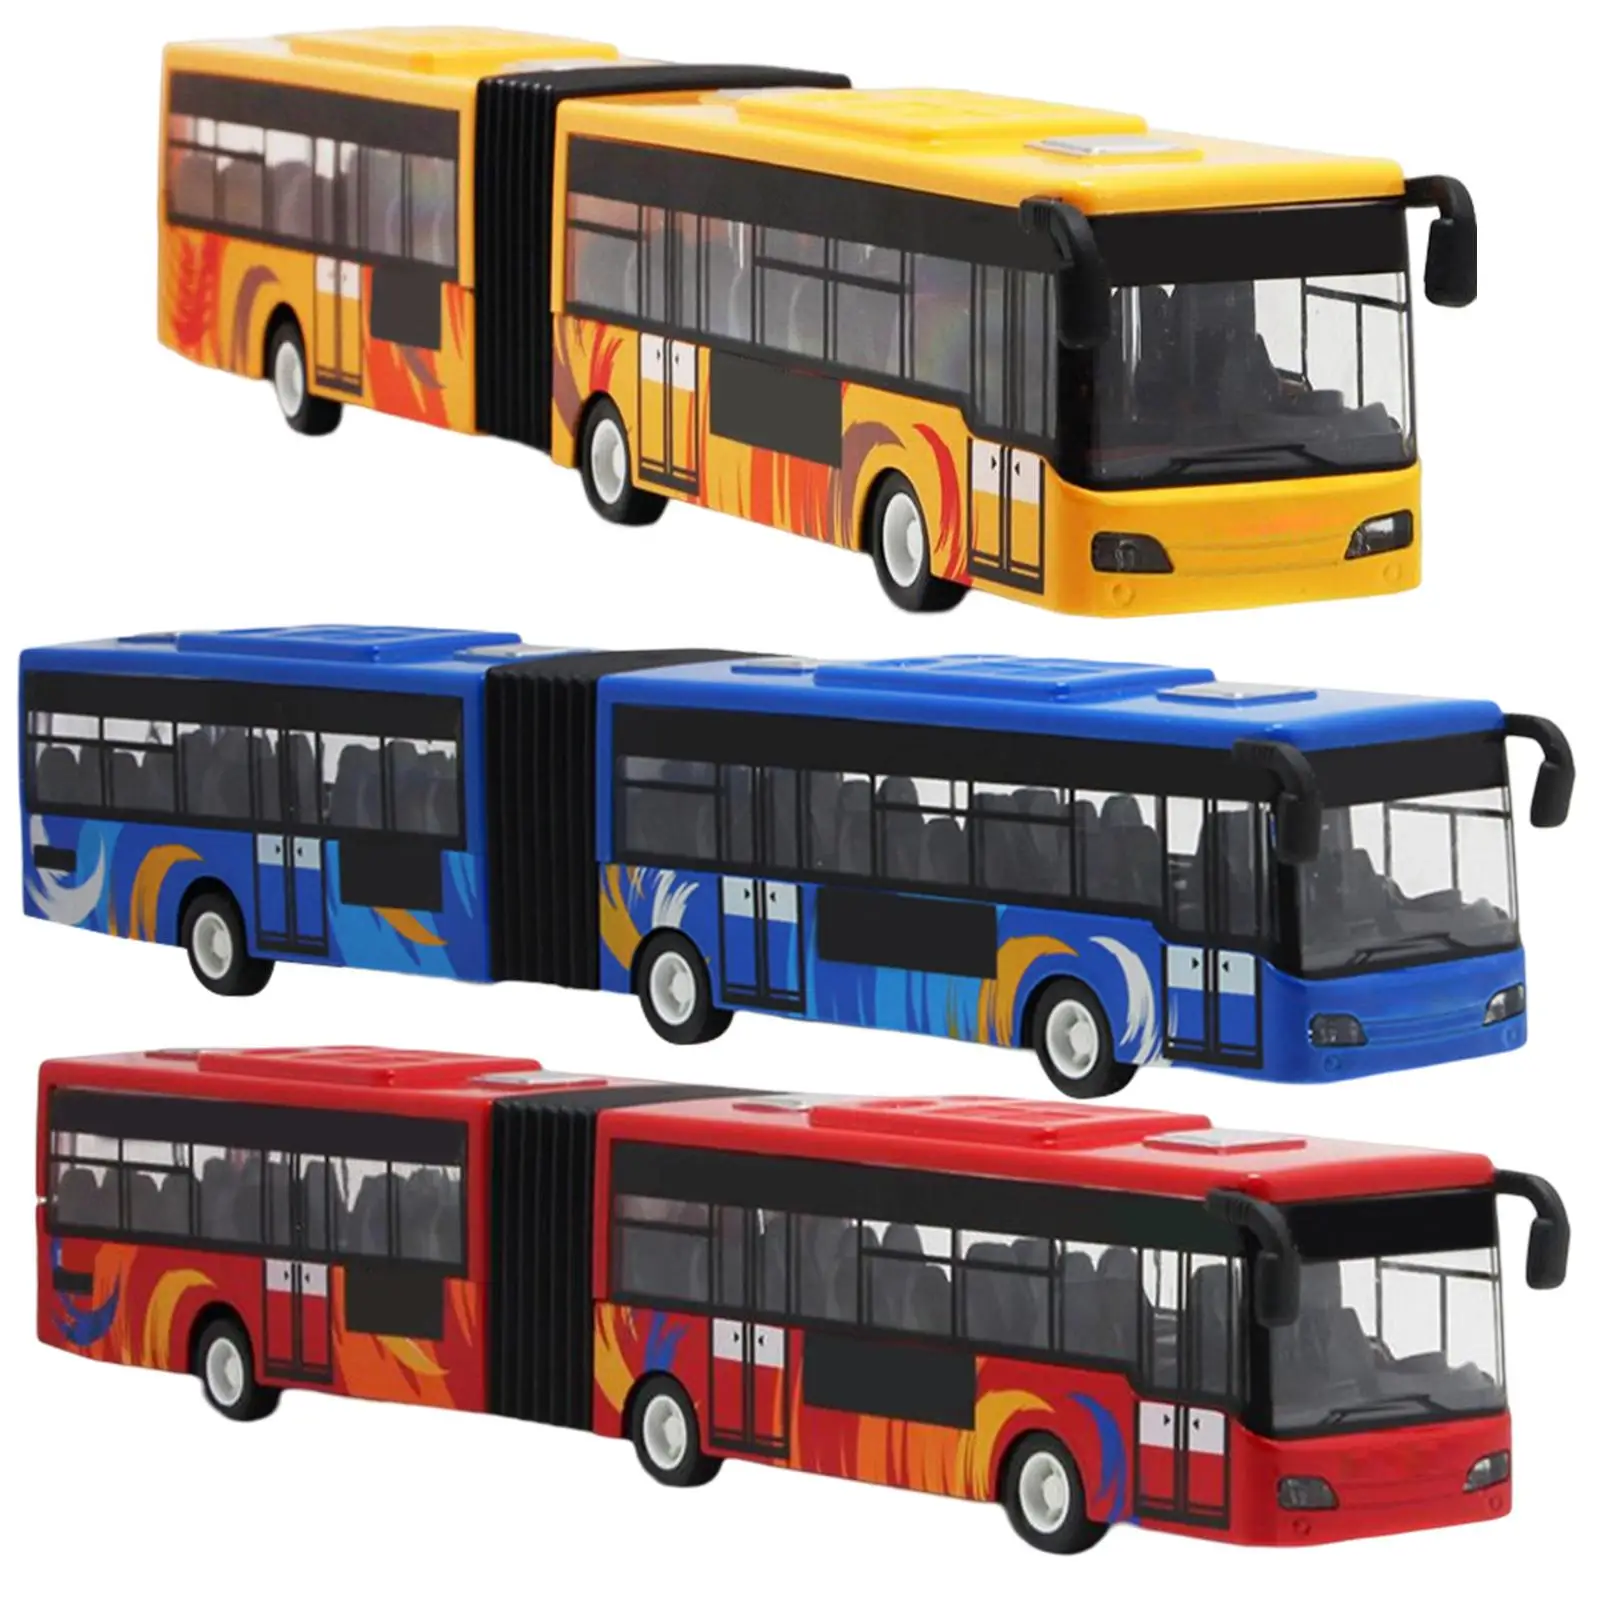 1/50 Scale Bus Toy Durable Gifts Collection Party Favors Decorative for Beginners Children